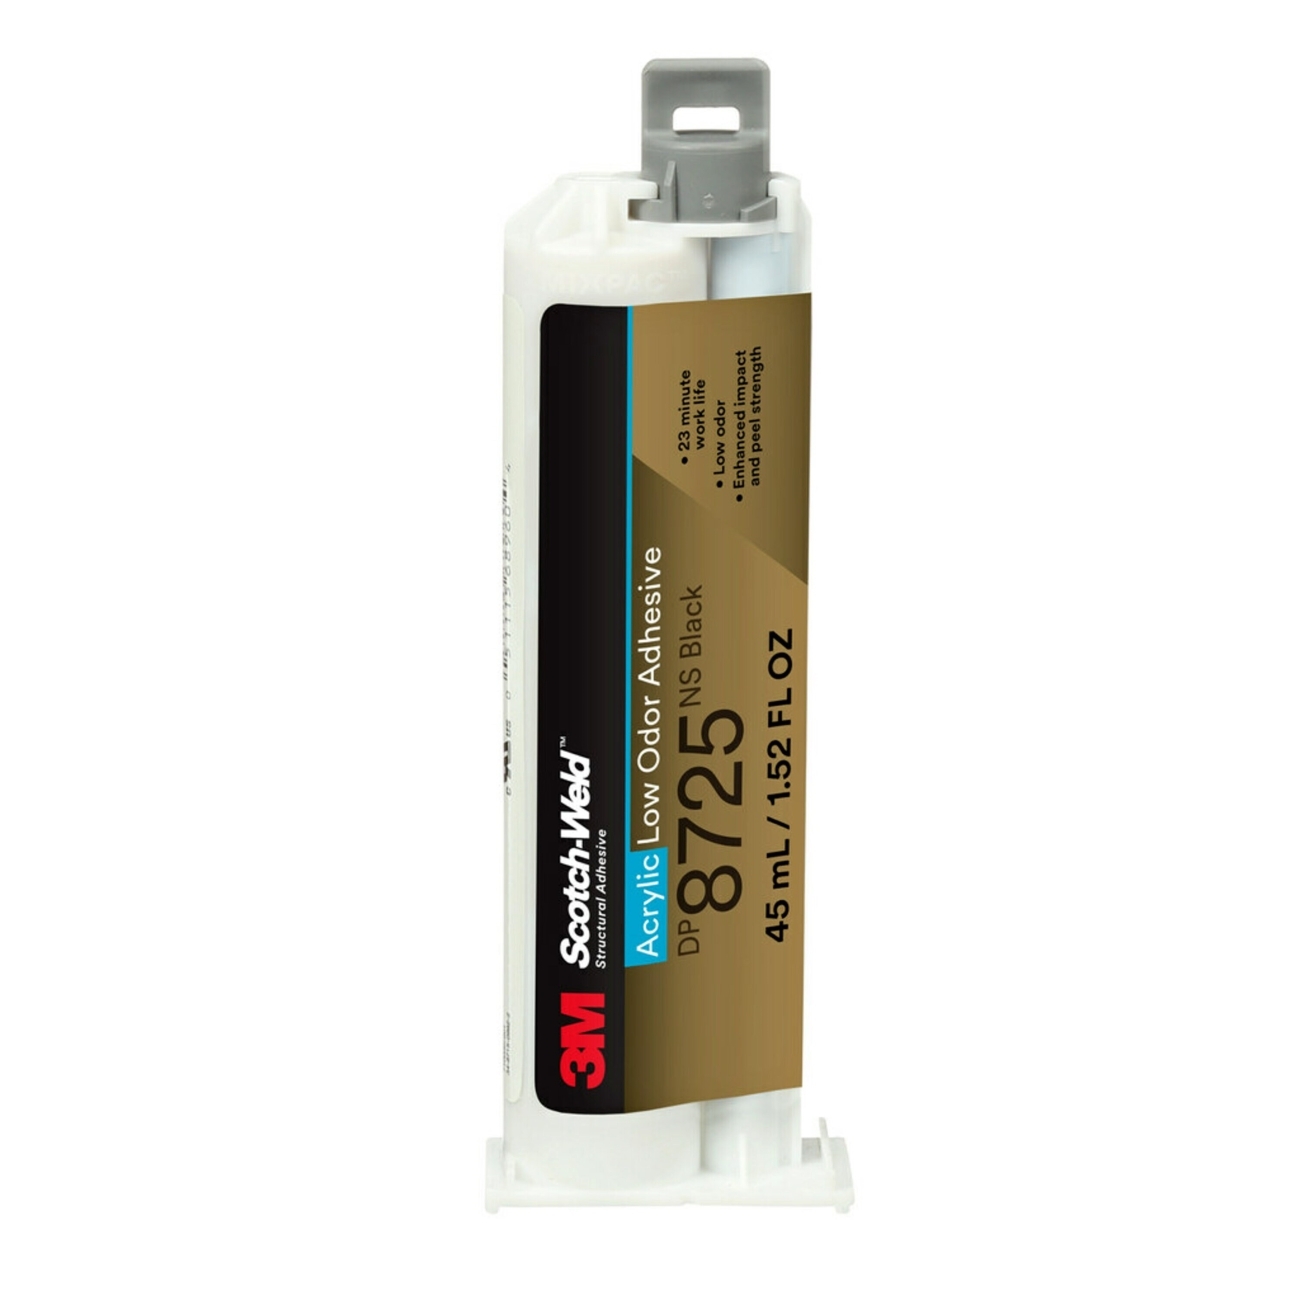 3M Scotch-Weld 2-component acrylic-based construction adhesive for the EPX System DP 8725 NS, black, 45 ml